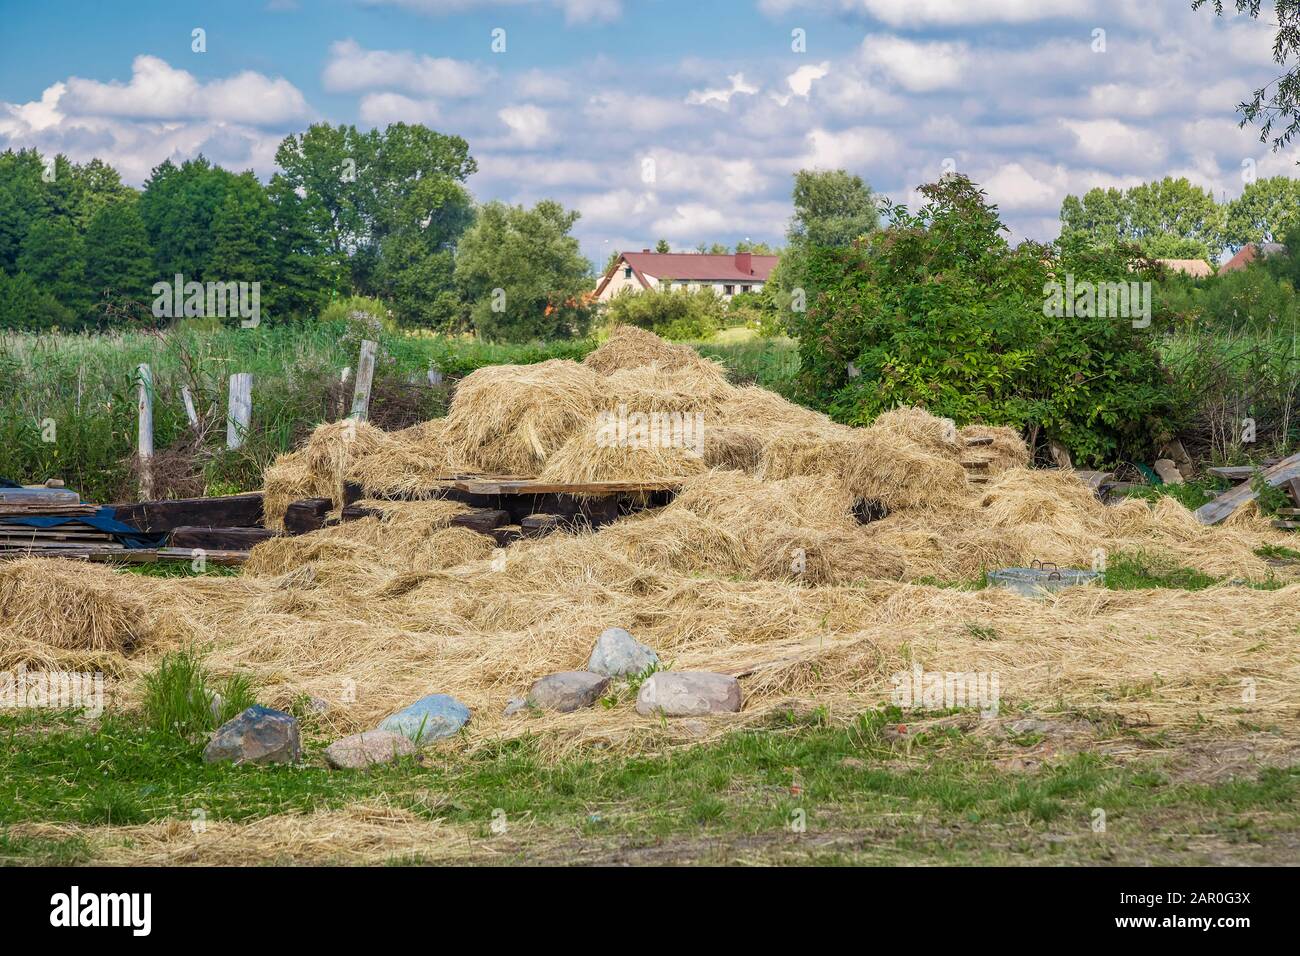 Rural landscape with a scattering of hay in the foreground Stock Photo